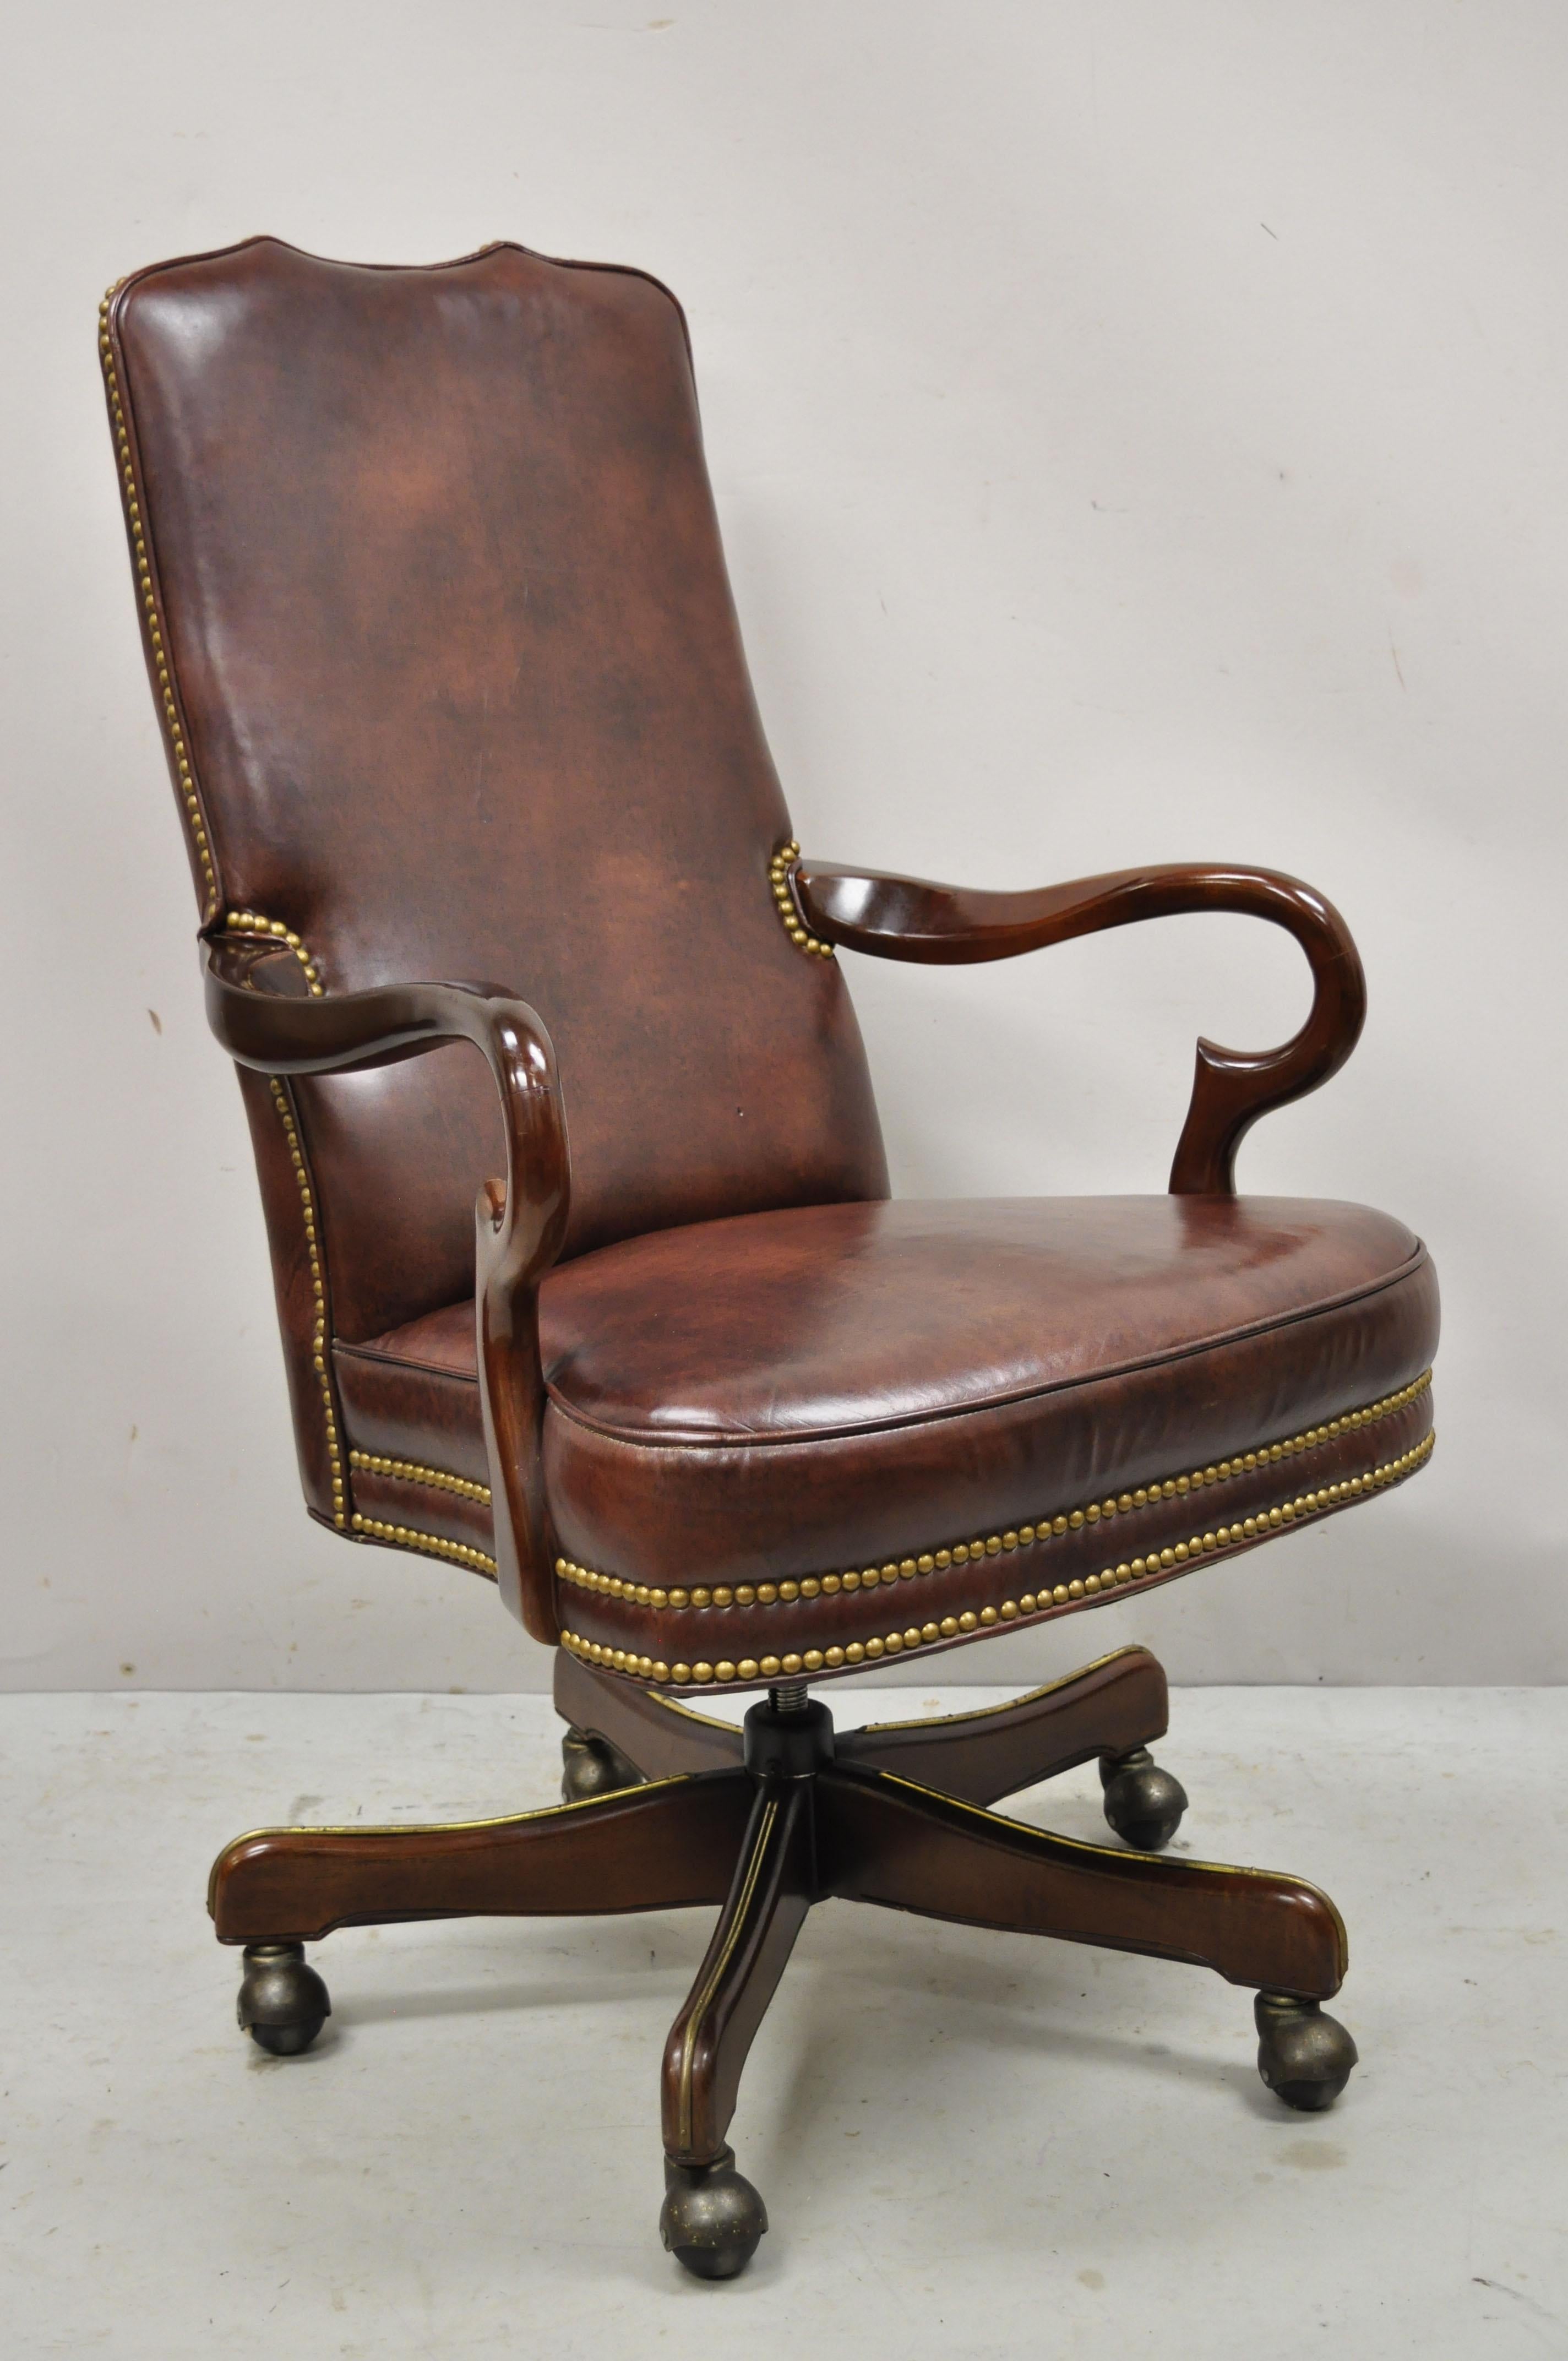 Vintage Brown Leather Queen Anne rolling executive office desk arm chair. Item features adjustable height, tilt spring back, wooden base, brown leather upholstery, solid wood frame, beautiful wood grain, very nice item, quality American